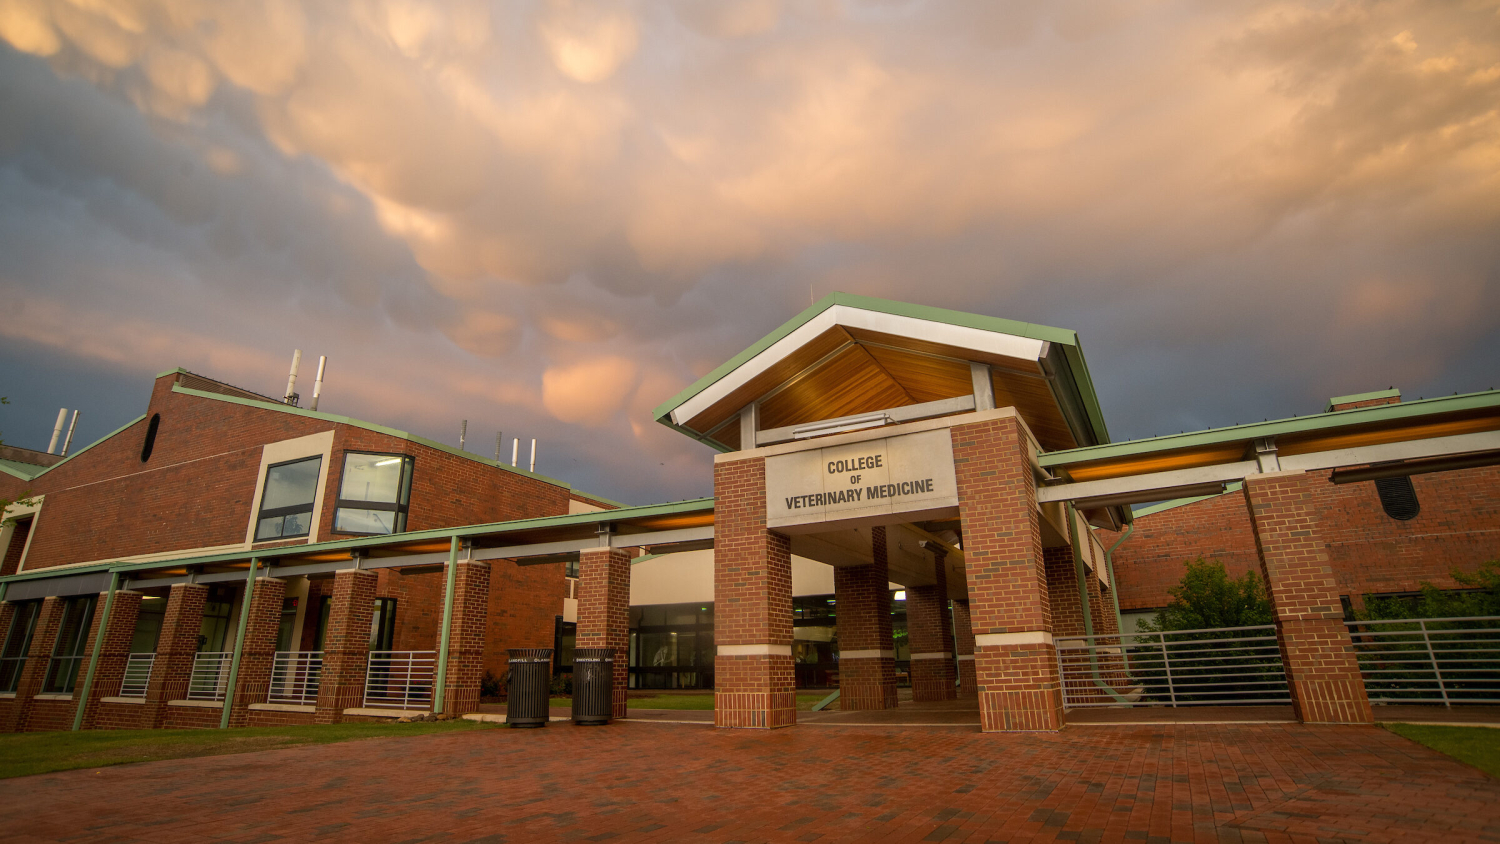 N.C. State college of veterinary medicine facility